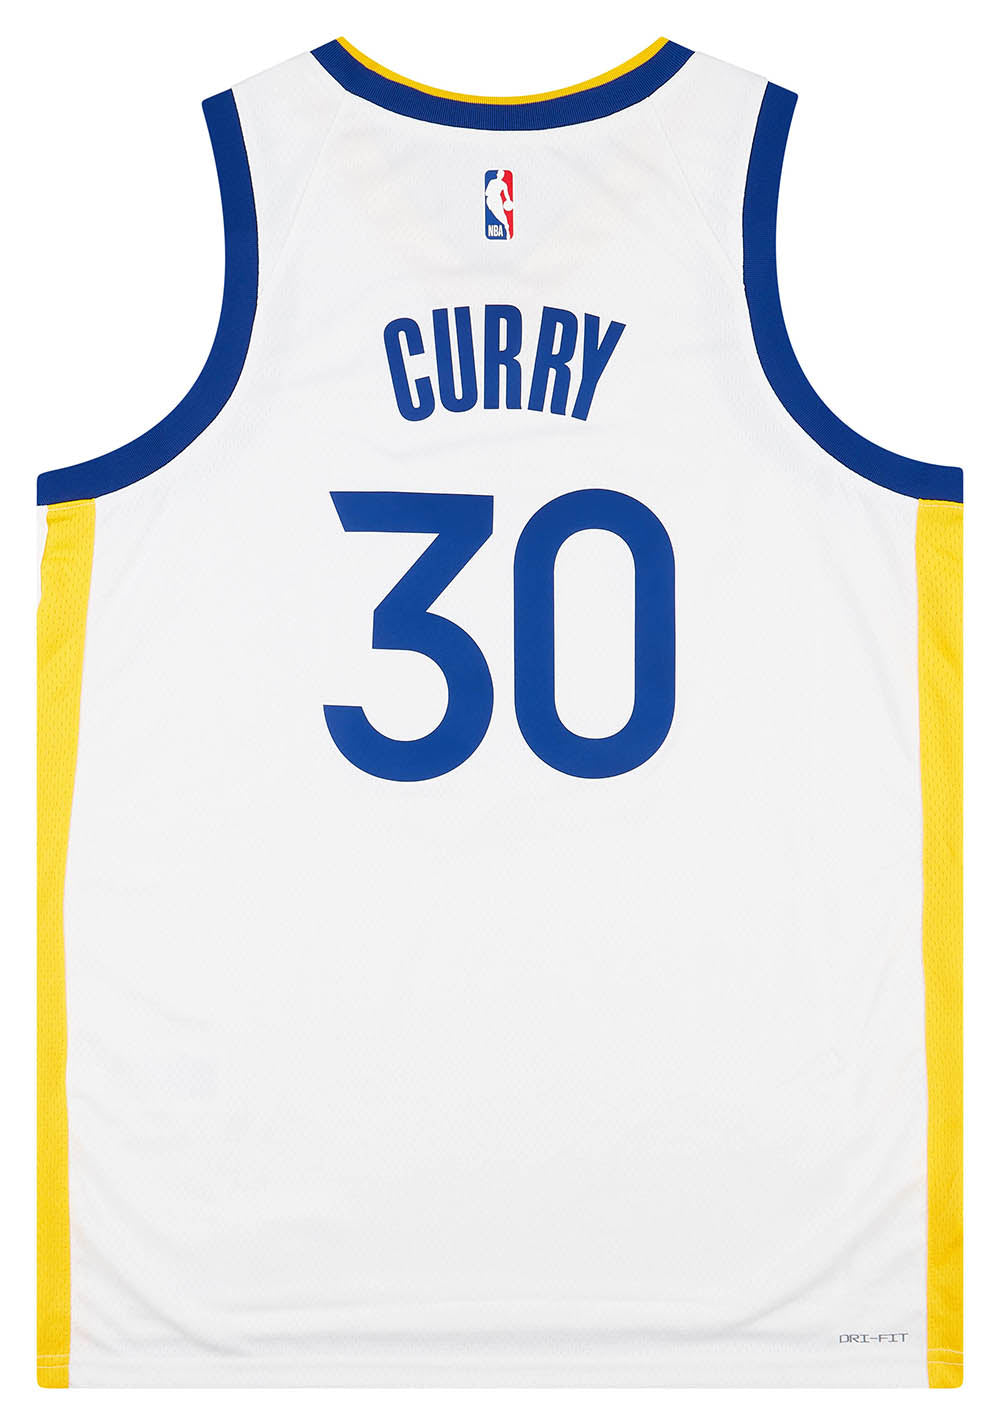 2017-23 GOLDEN STATE WARRIORS CURRY #30 NIKE SWINGMAN JERSEY (HOME) L - W/TAGS